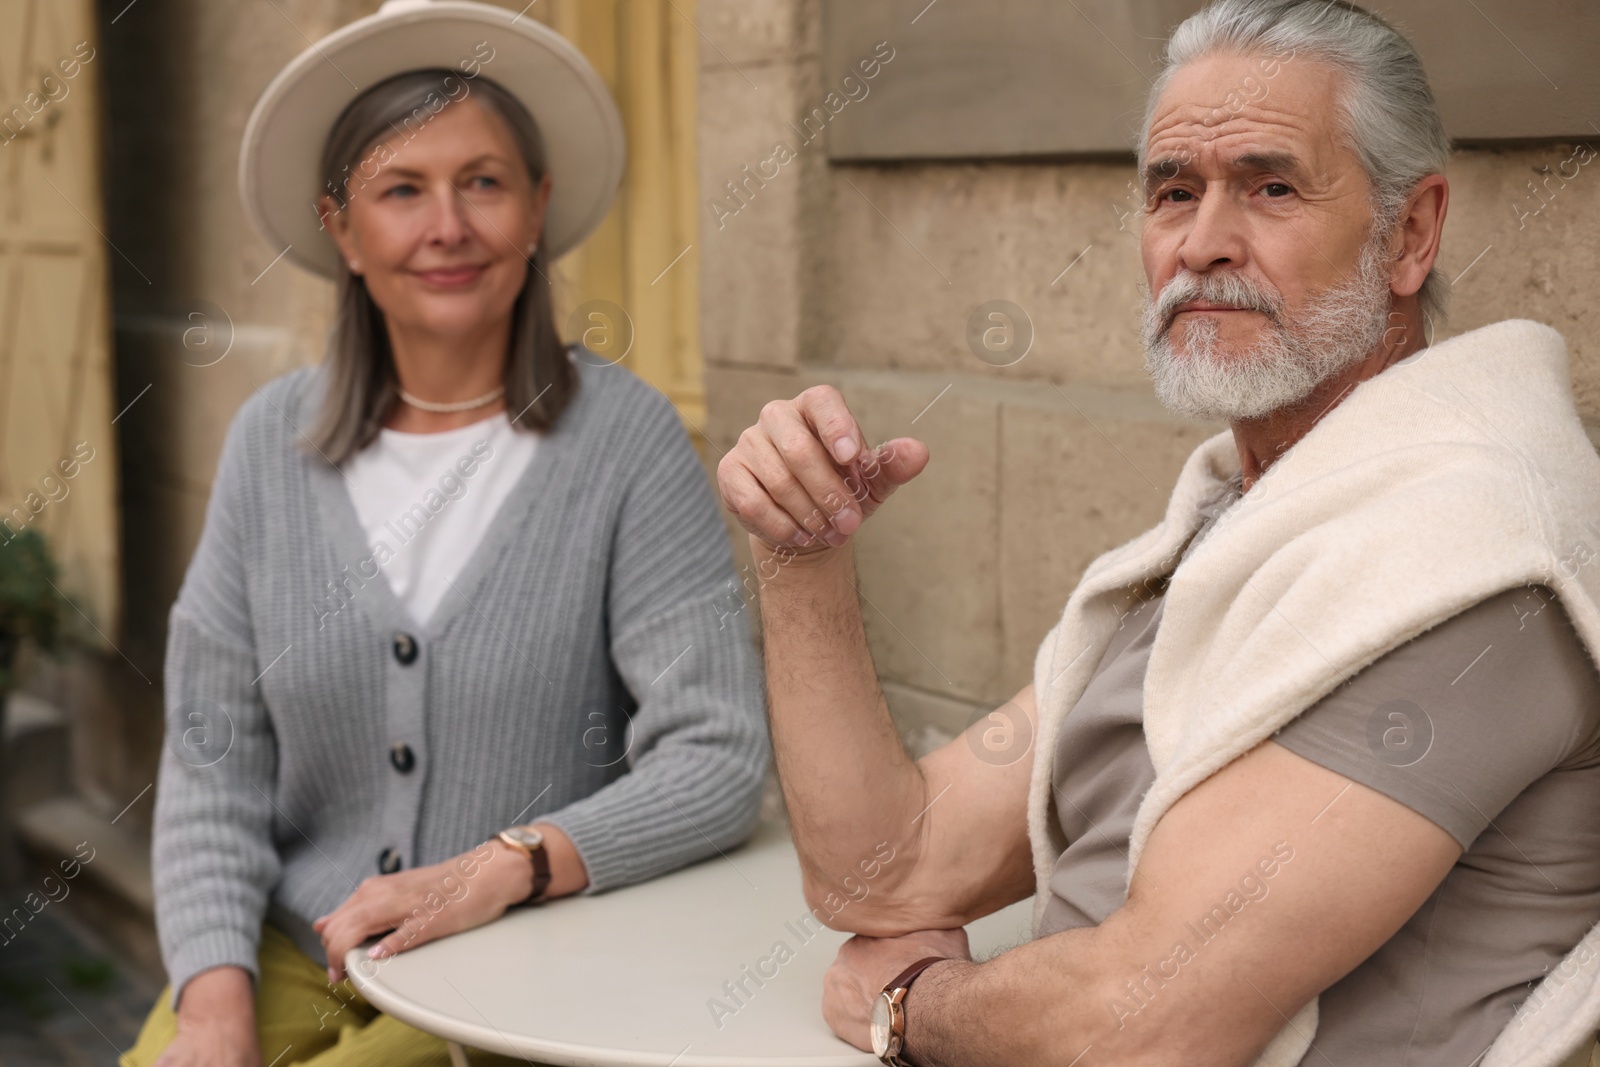 Photo of Affectionate senior couple sitting in outdoor cafe